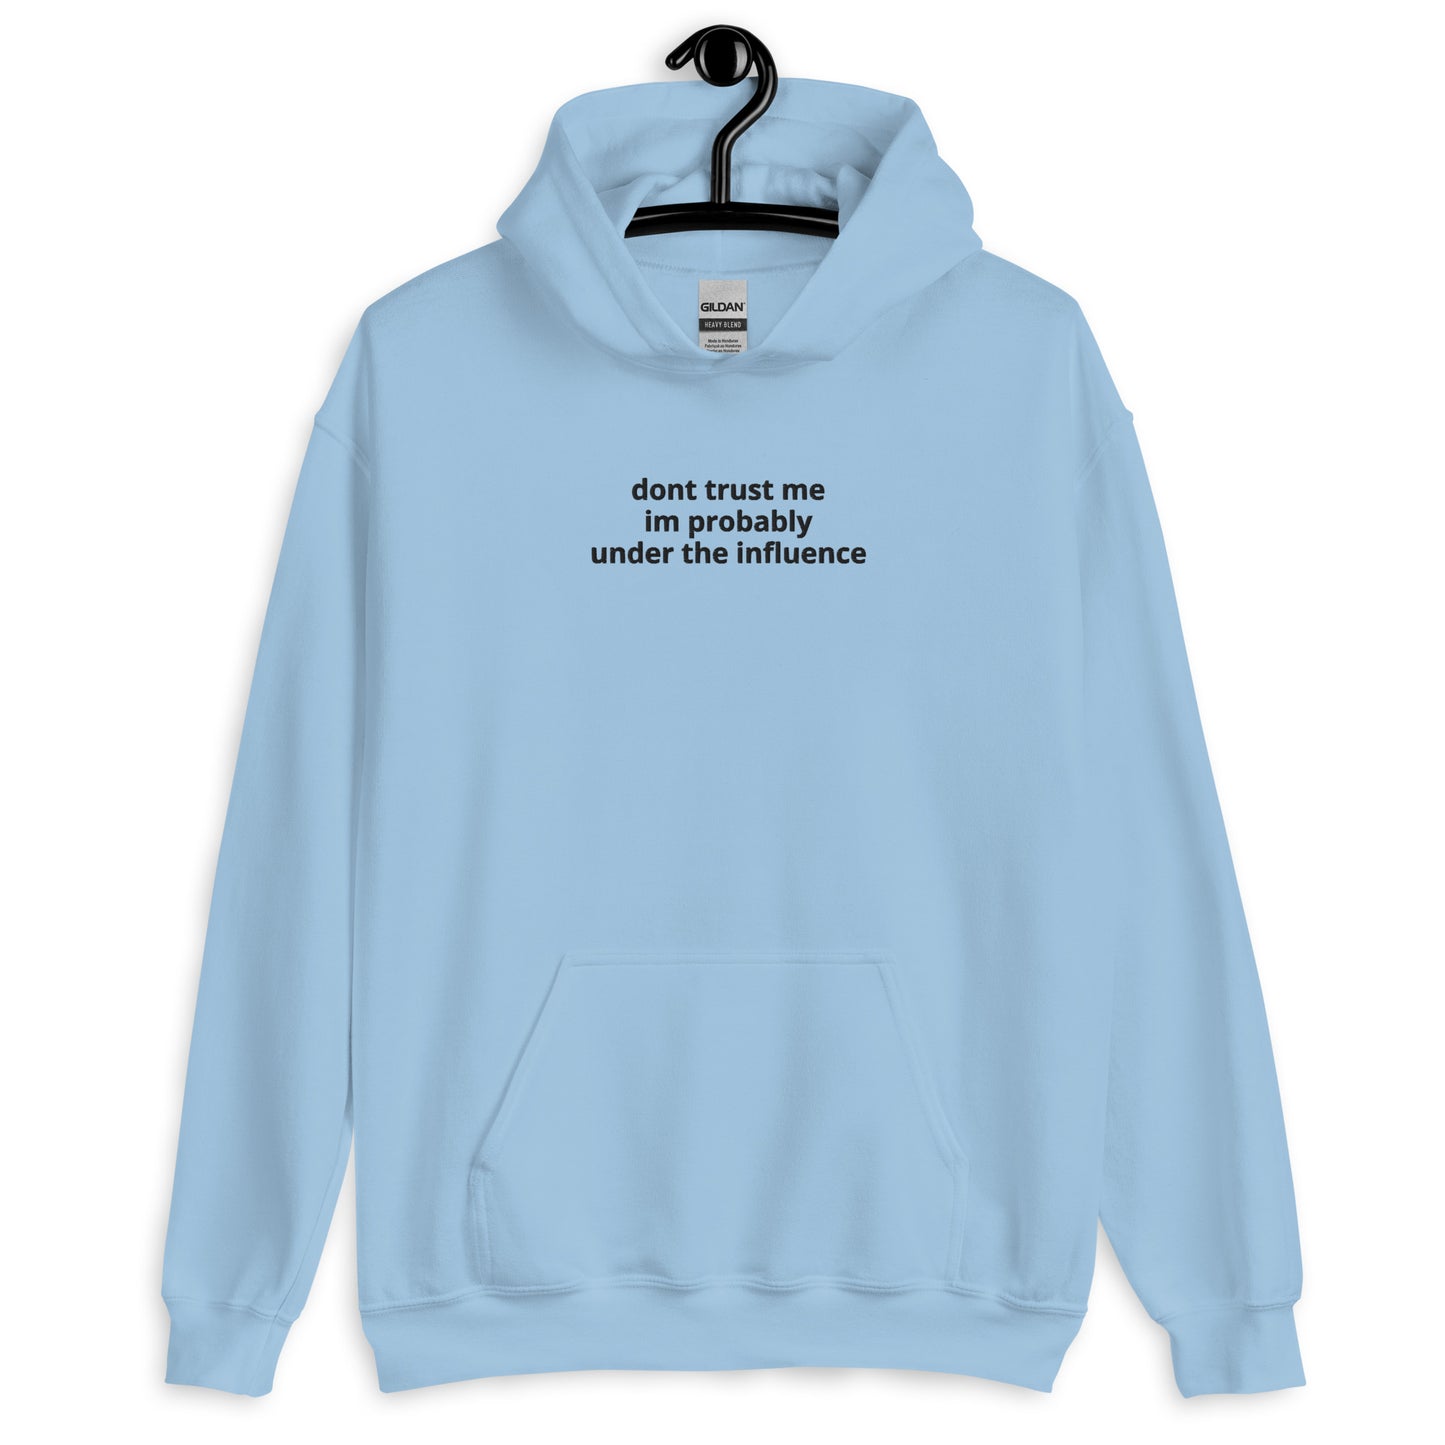 under the influence Hoodie